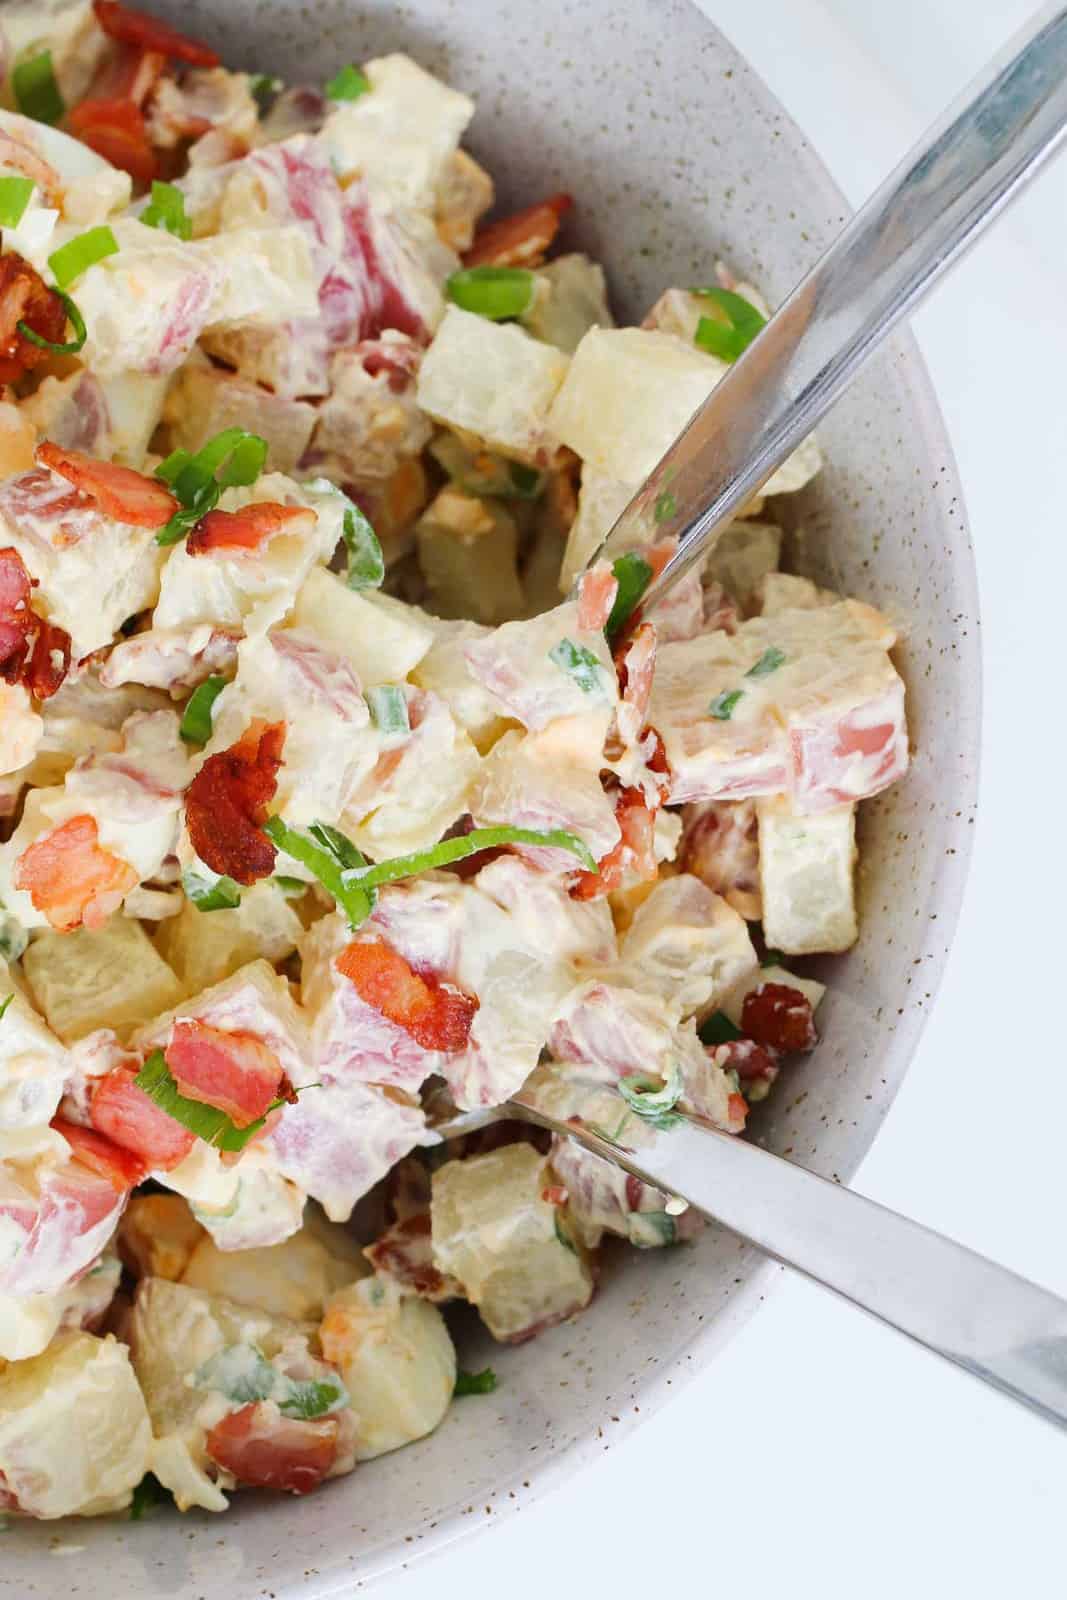 Salad servers in a bowl of potatoes, bacon, eggs, spring onions with a creamy dressing.